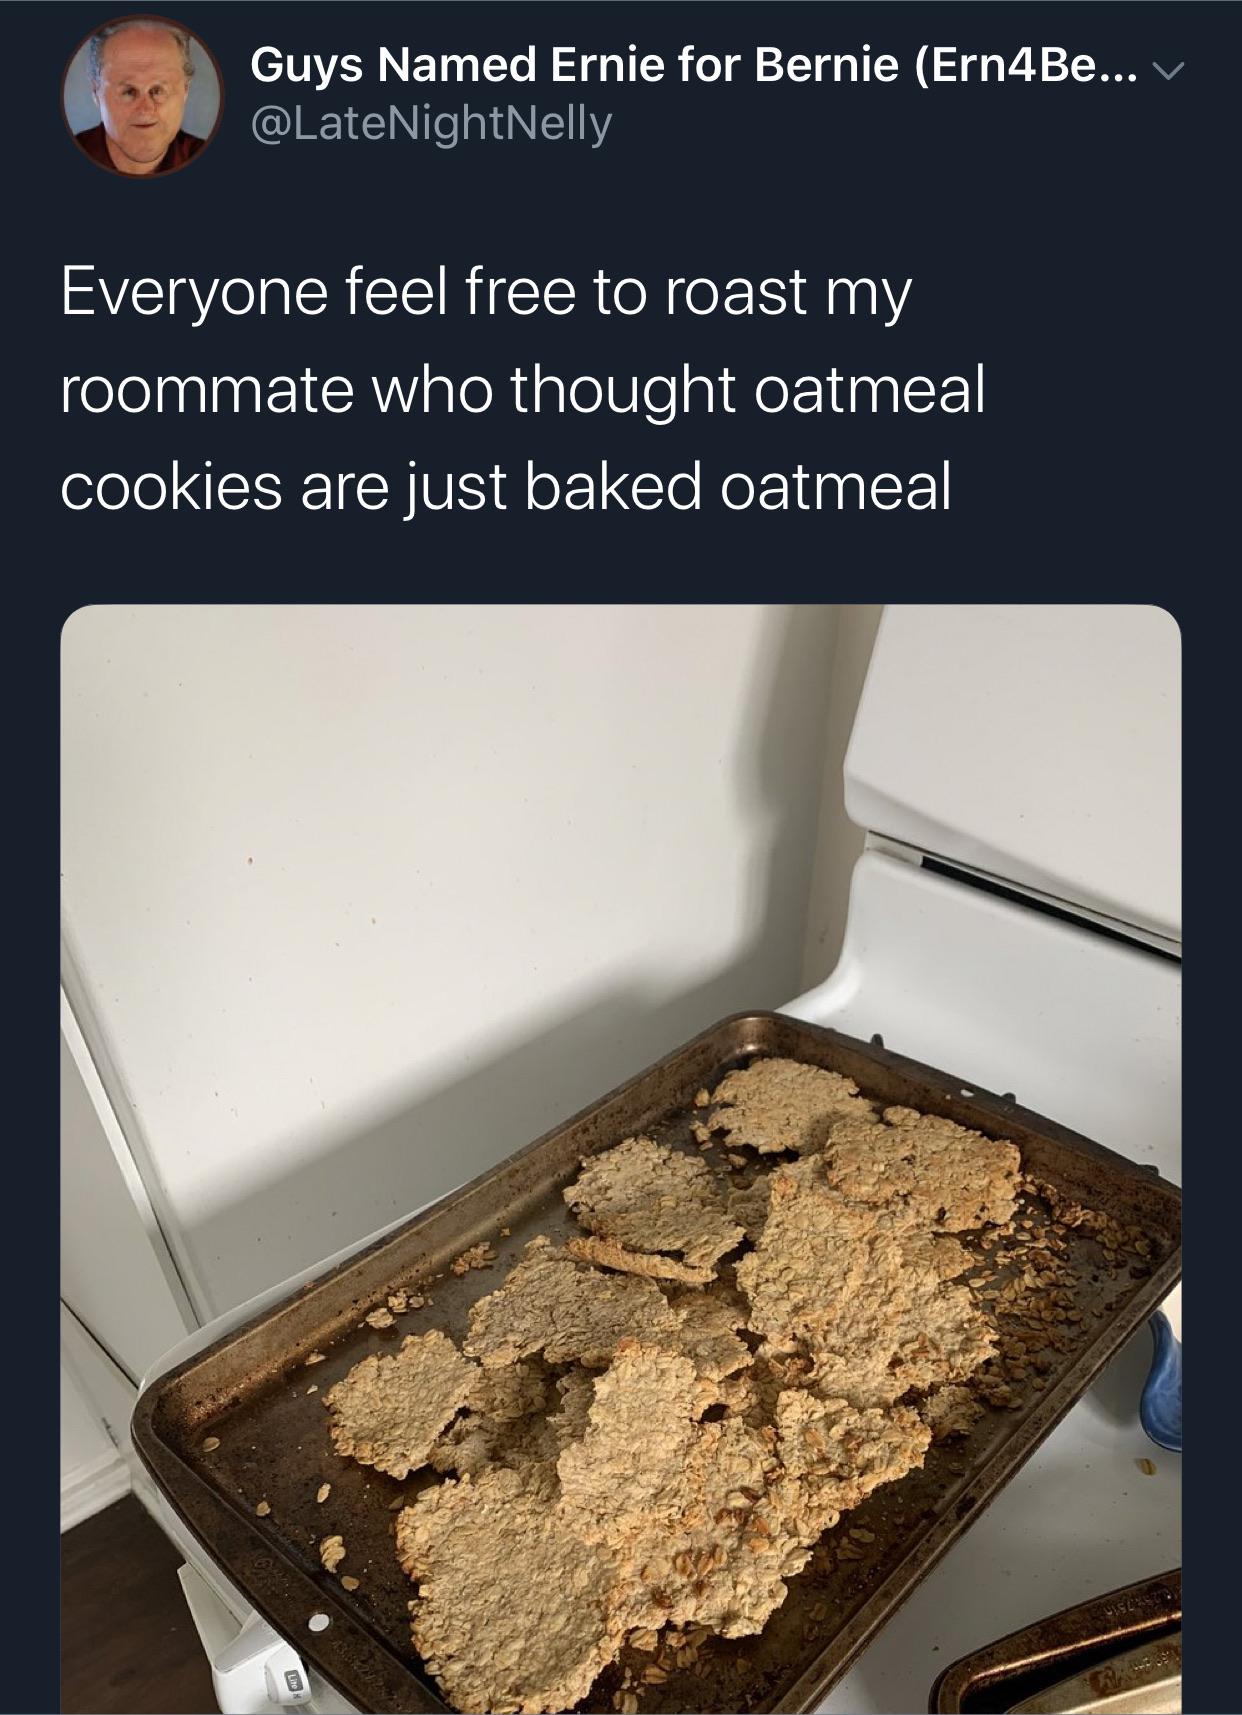 soil - Guys Named Ernie for Bernie Ern4Be... V NightNelly Everyone feel free to roast my roommate who thought oatmeal cookies are just baked oatmeal